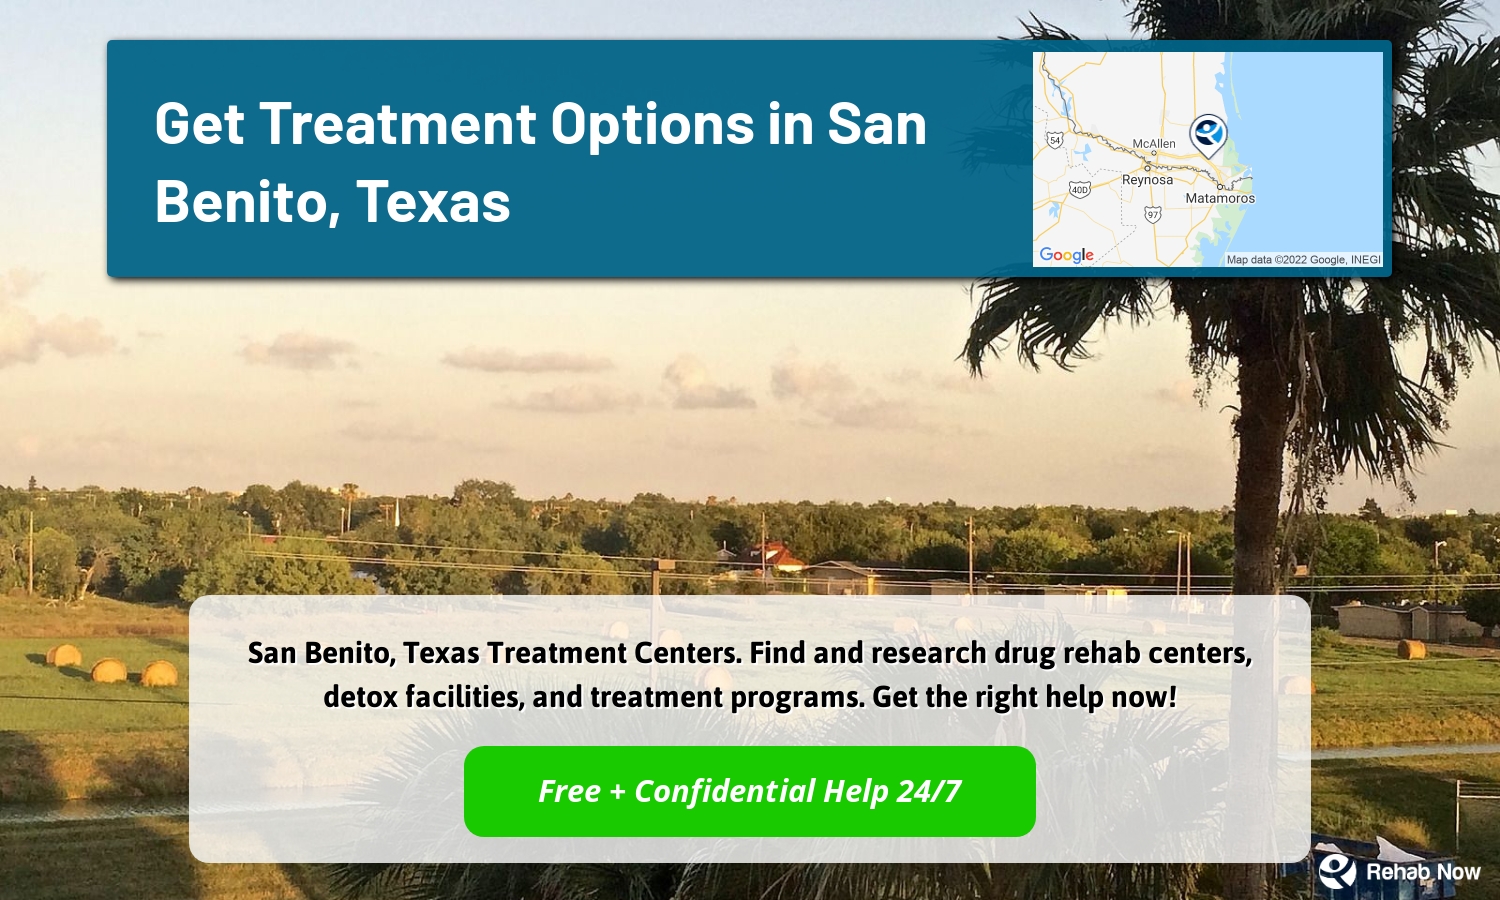 San Benito, Texas Treatment Centers. Find and research drug rehab centers, detox facilities, and treatment programs. Get the right help now!